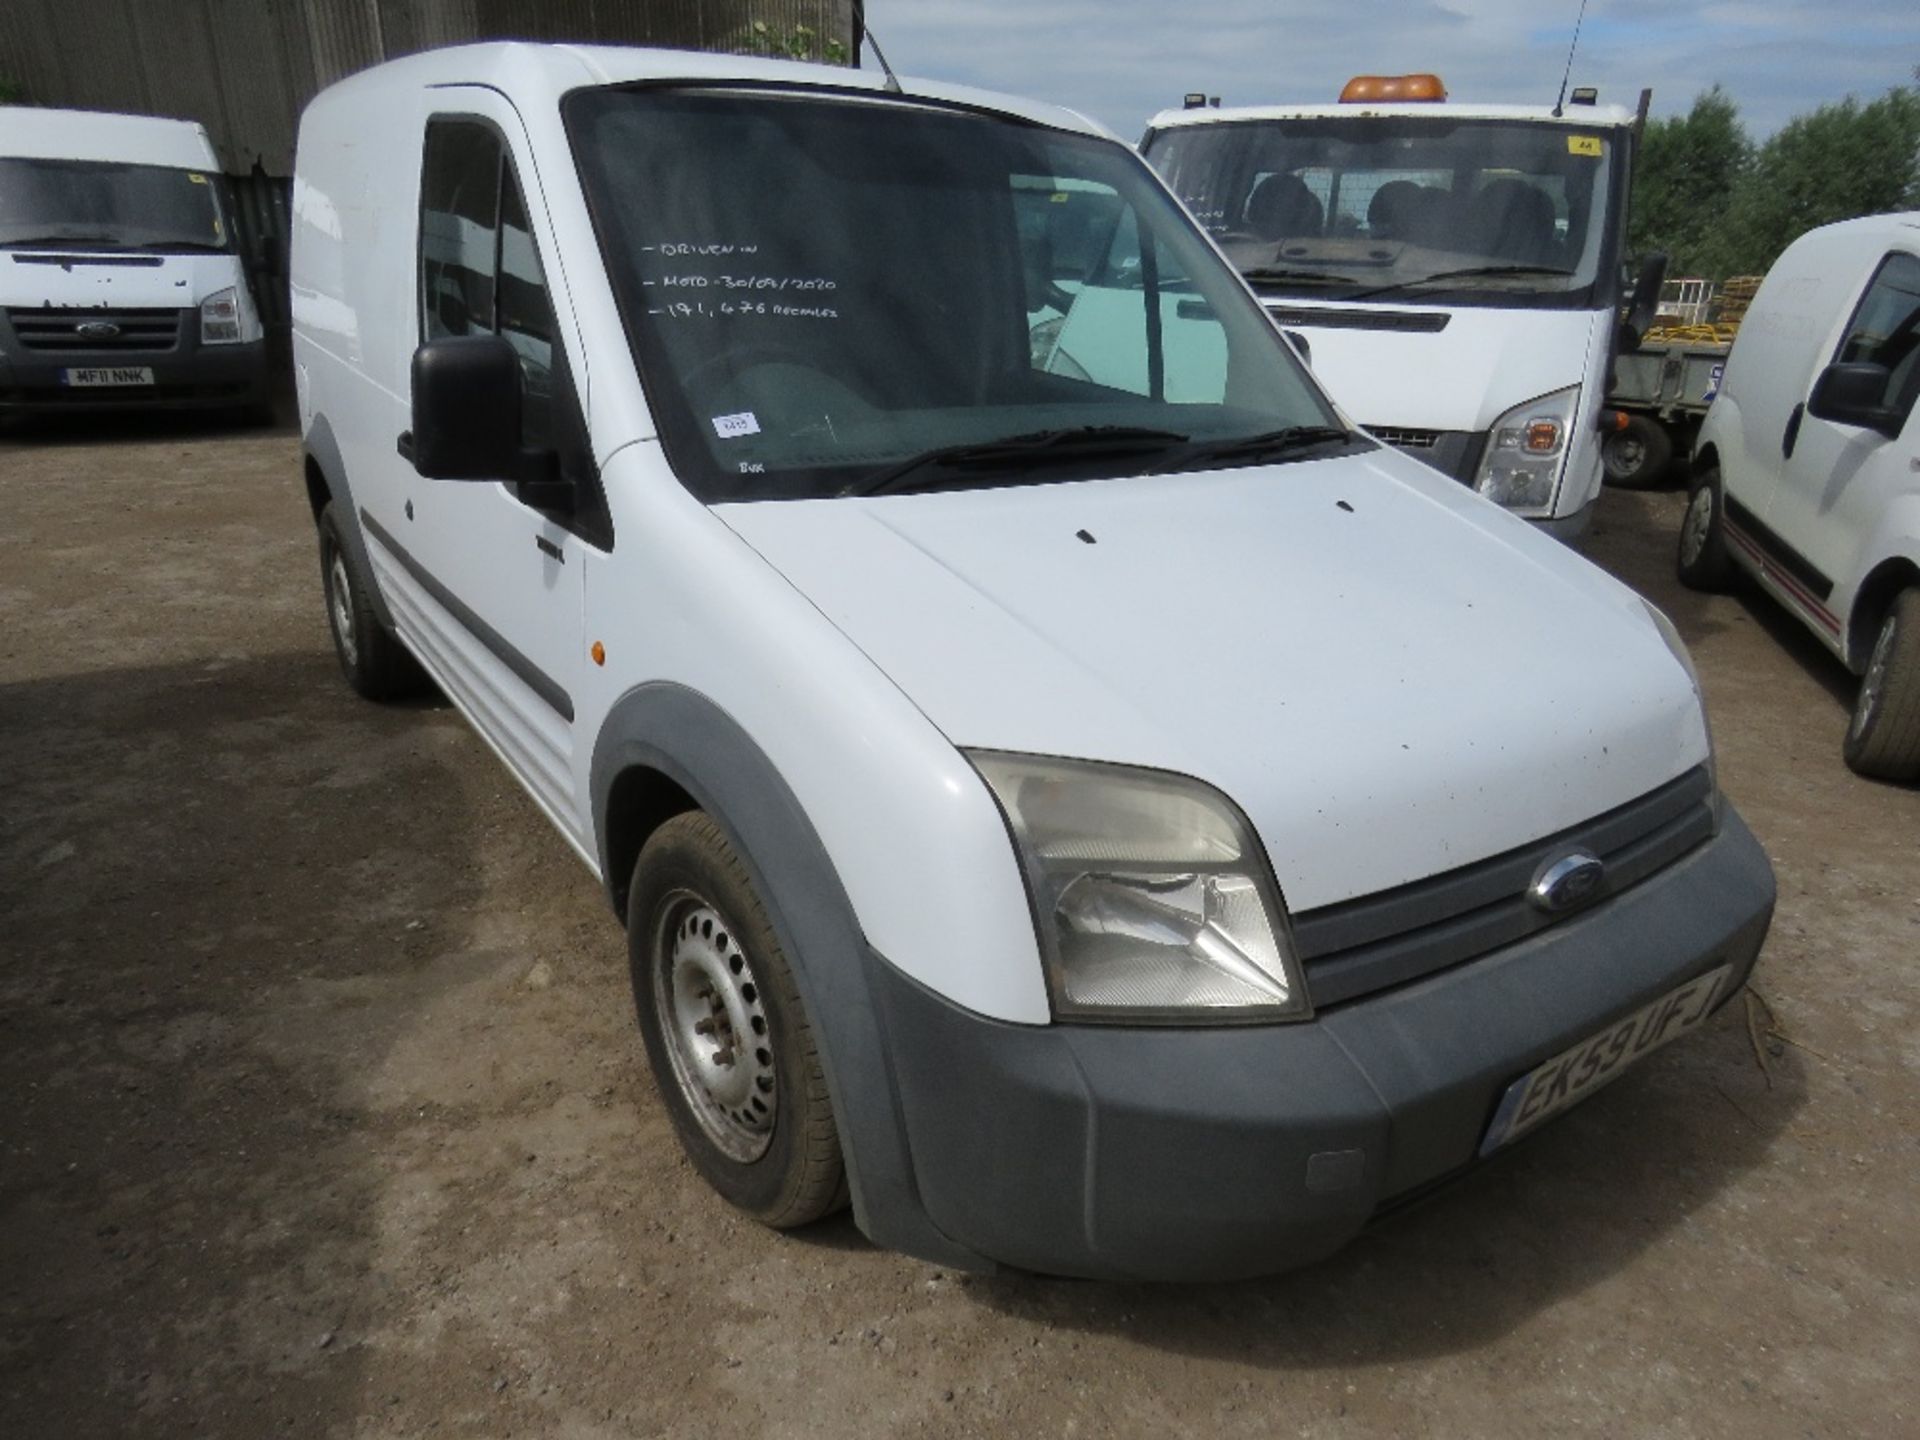 NB: BID INCREMENT HAS NOW BEEN CHANGED TO £50.............FORD TRANSIT CONNECT PANEL VAN REG:E